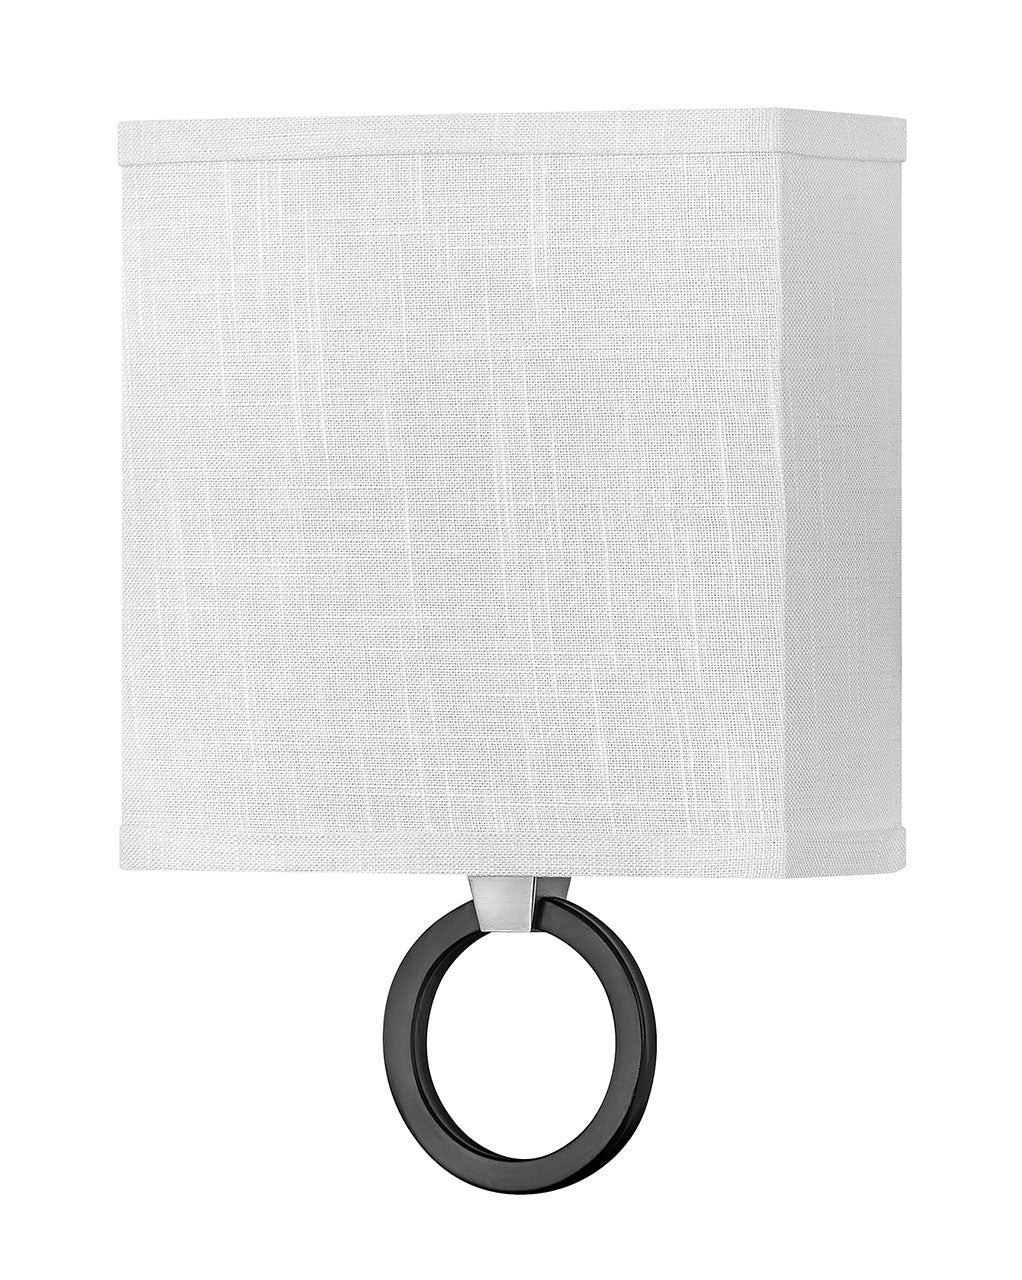 Hinkley - 41202BN - LED Wall Sconce - Link Off White - Brushed Nickel